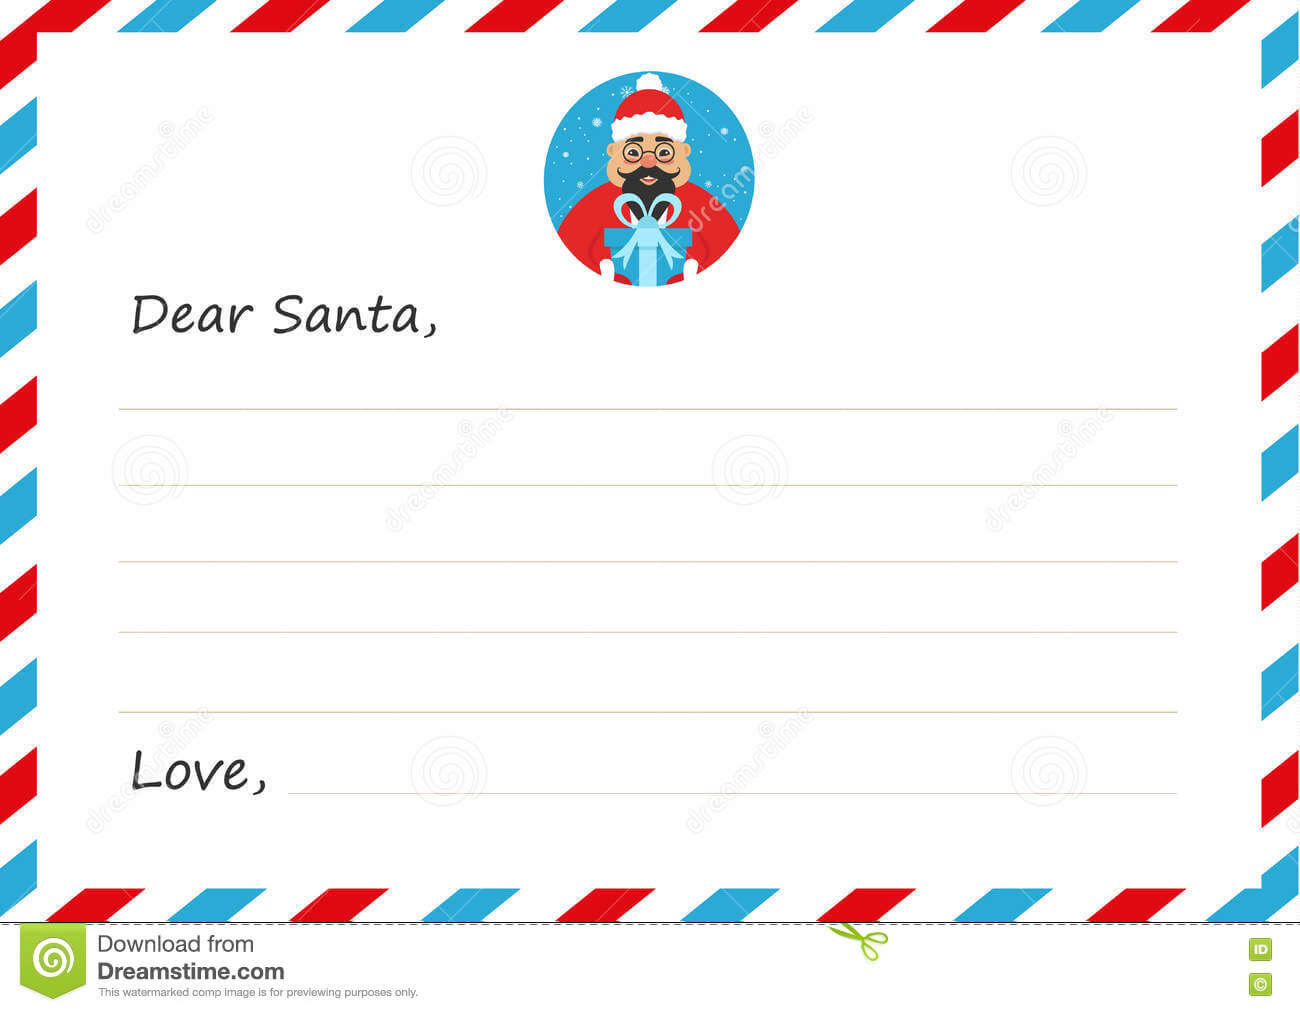 Template Envelope New Year`s Or Christmas Letter To Cute Throughout Christmas Note Card Templates